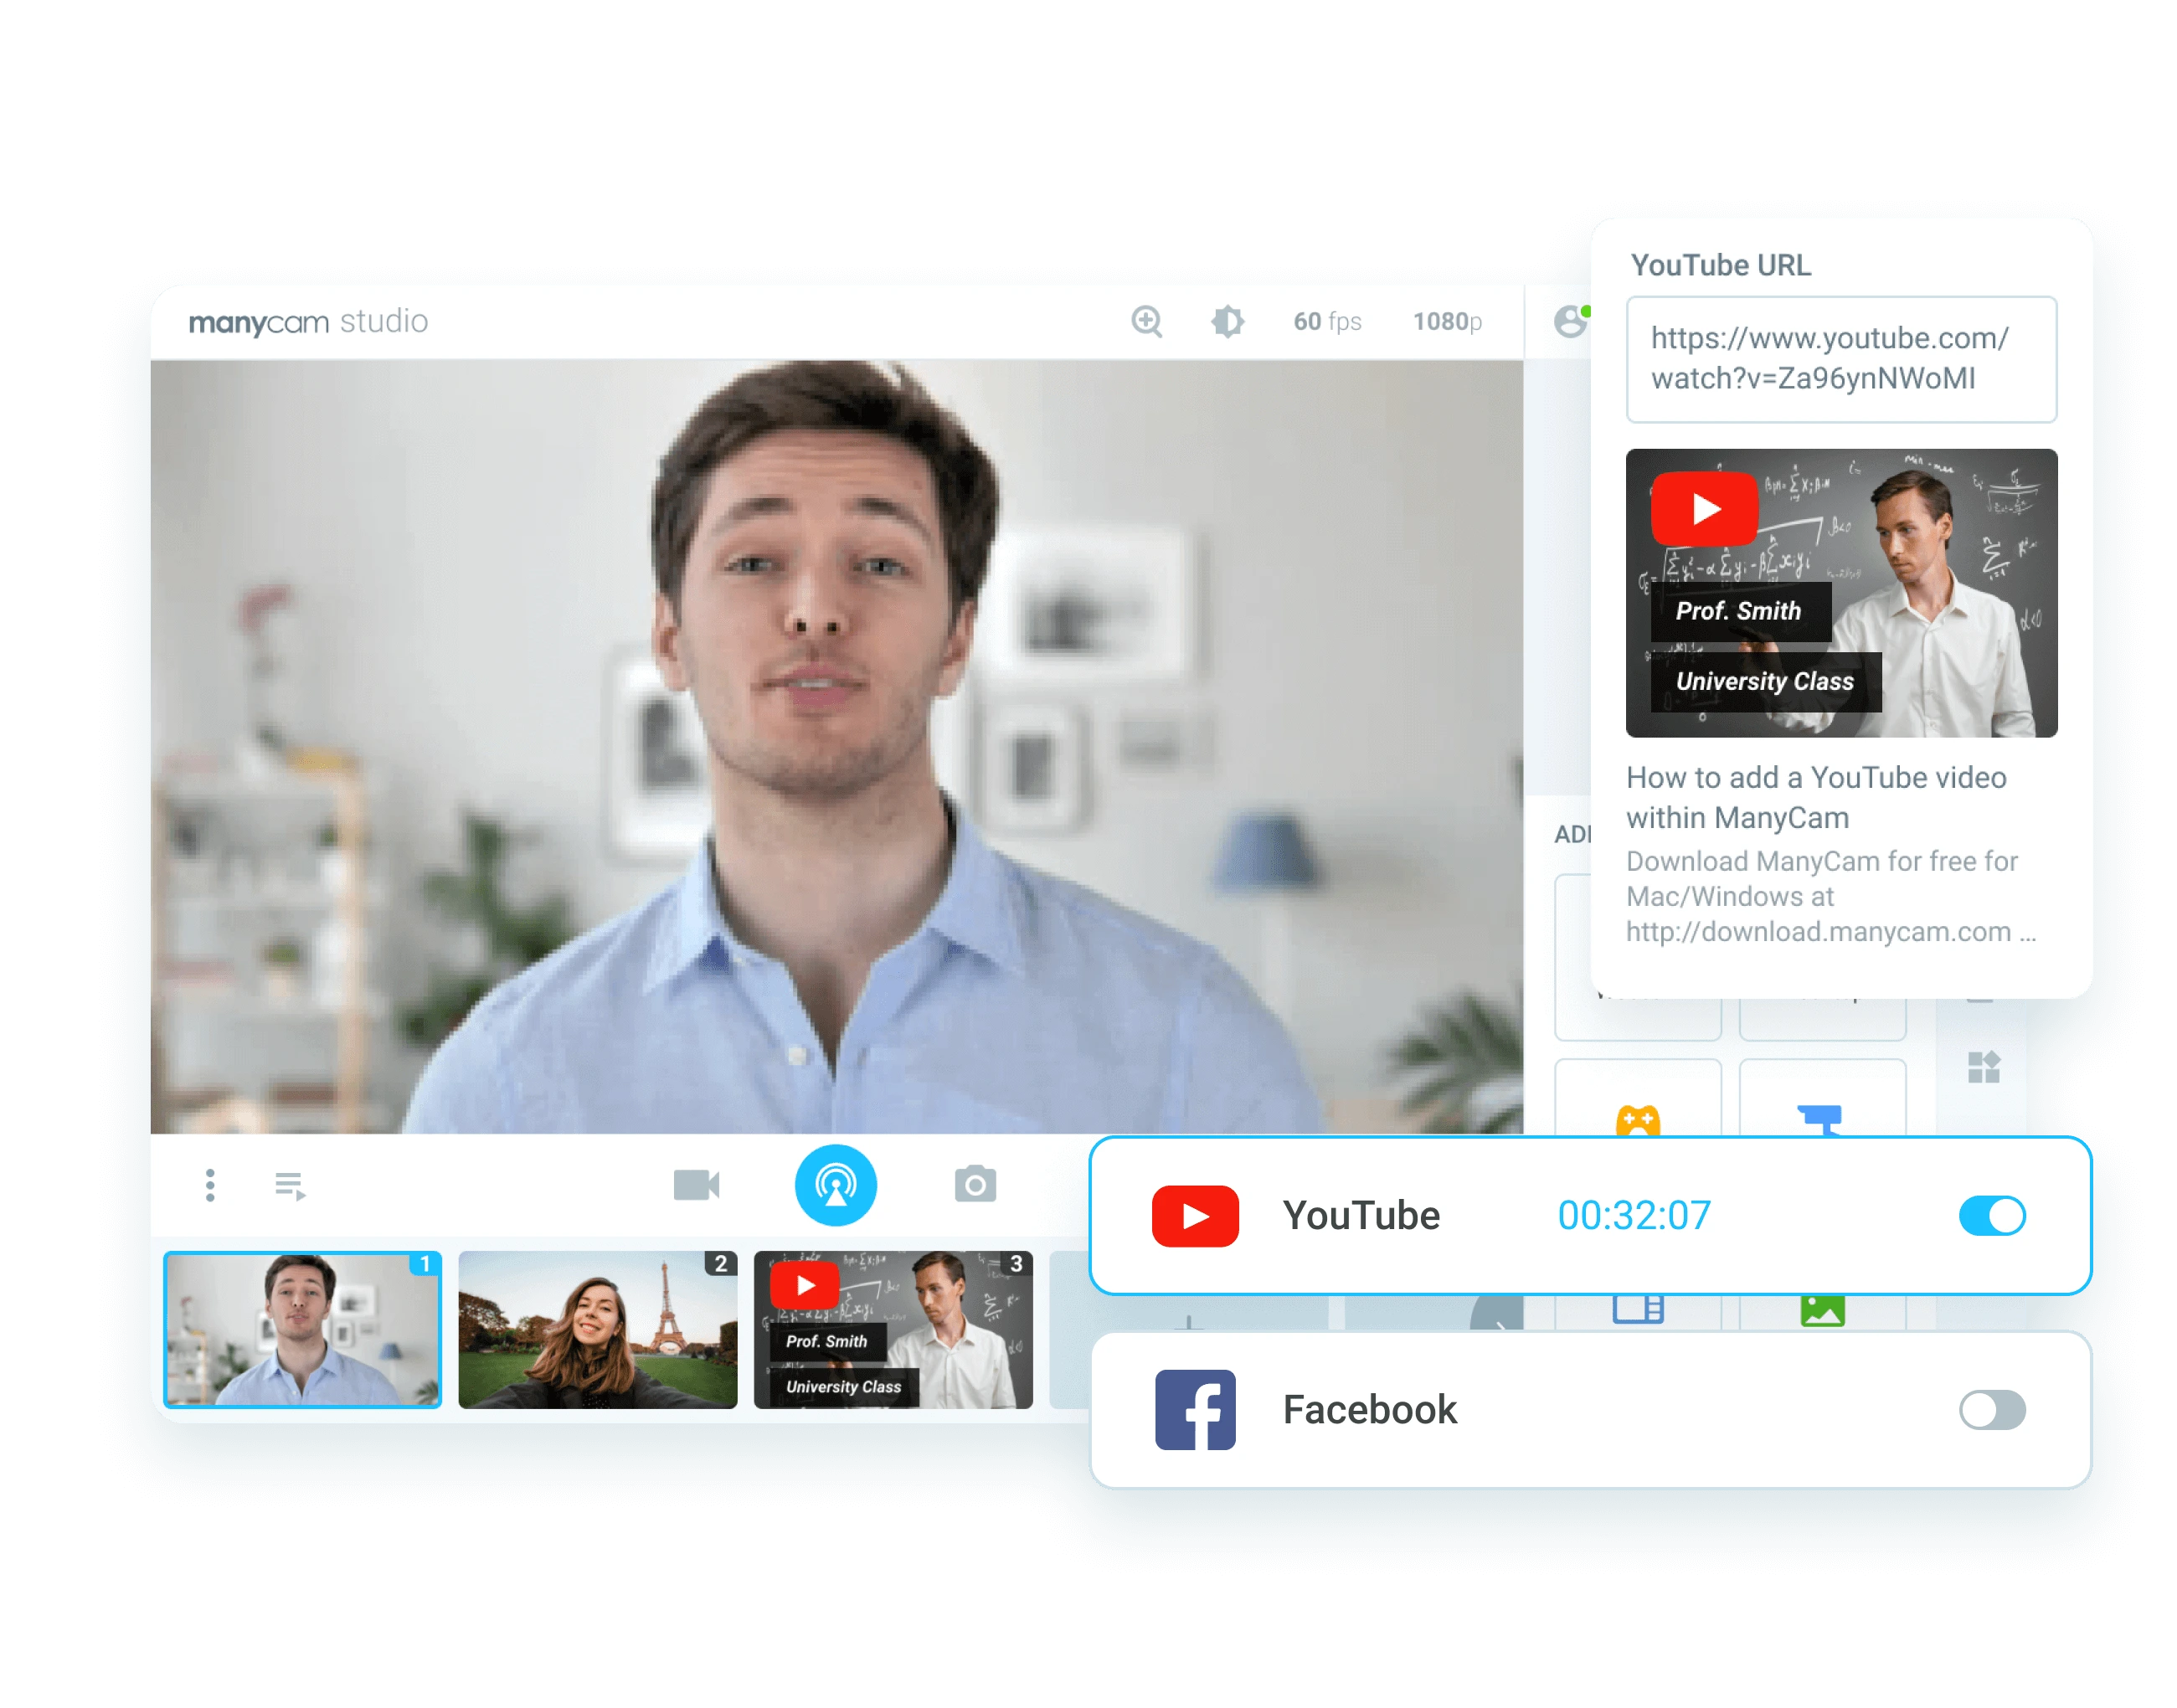 Streaming has never been easier! Connect ManyCam to Facebook and Youtube to stream simultaneously. Quickly set up your RTMP stream and broadcast to your favorite streaming services and go live on multiple platforms at once to increase your online reach.